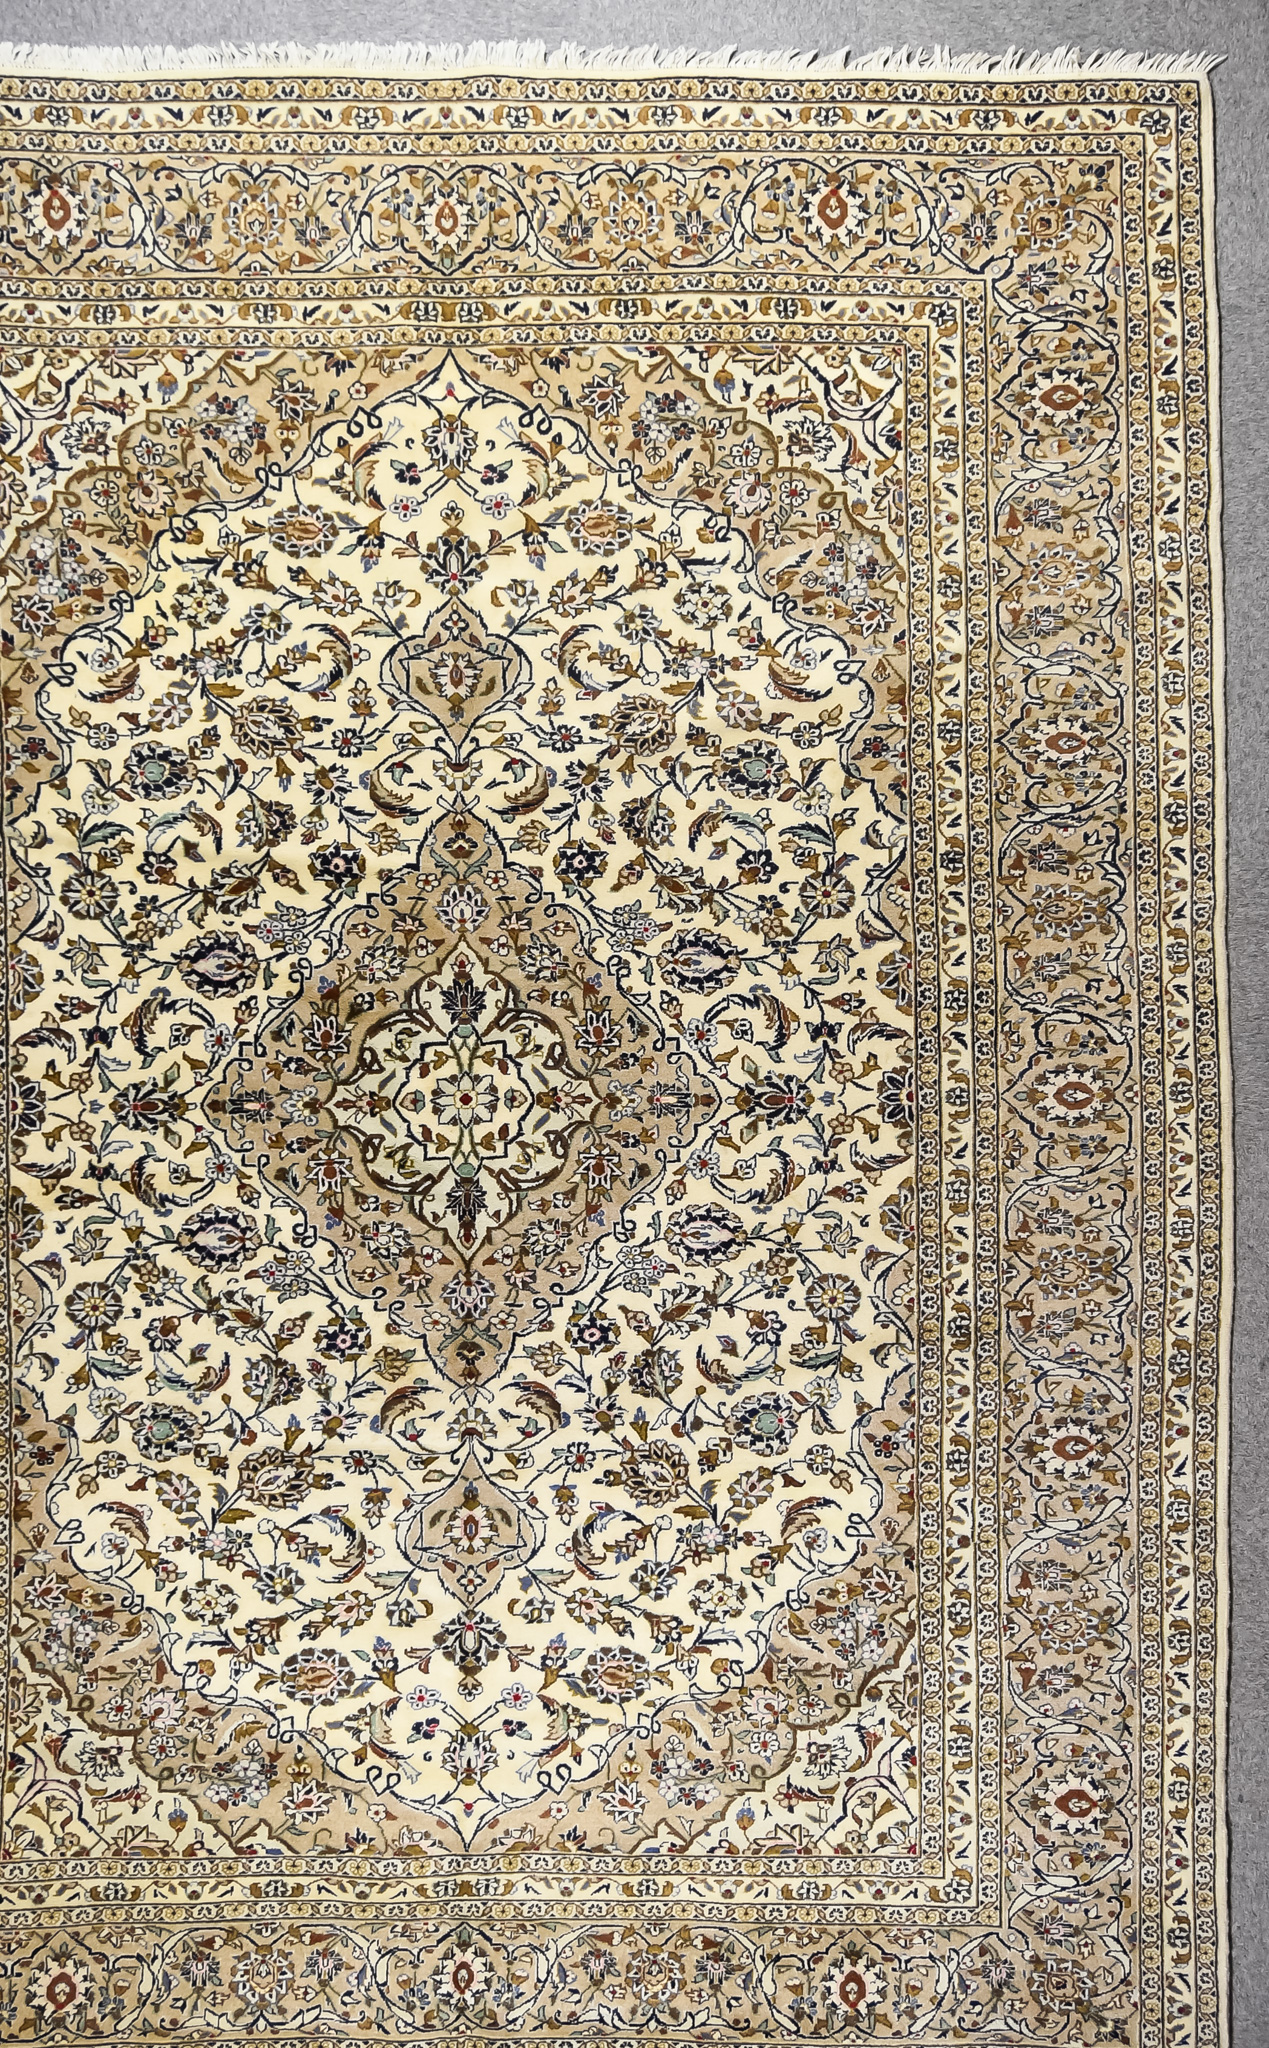 A 20th Century Tabriz Carpet, woven in pastel shades, with a bold central stylised floral